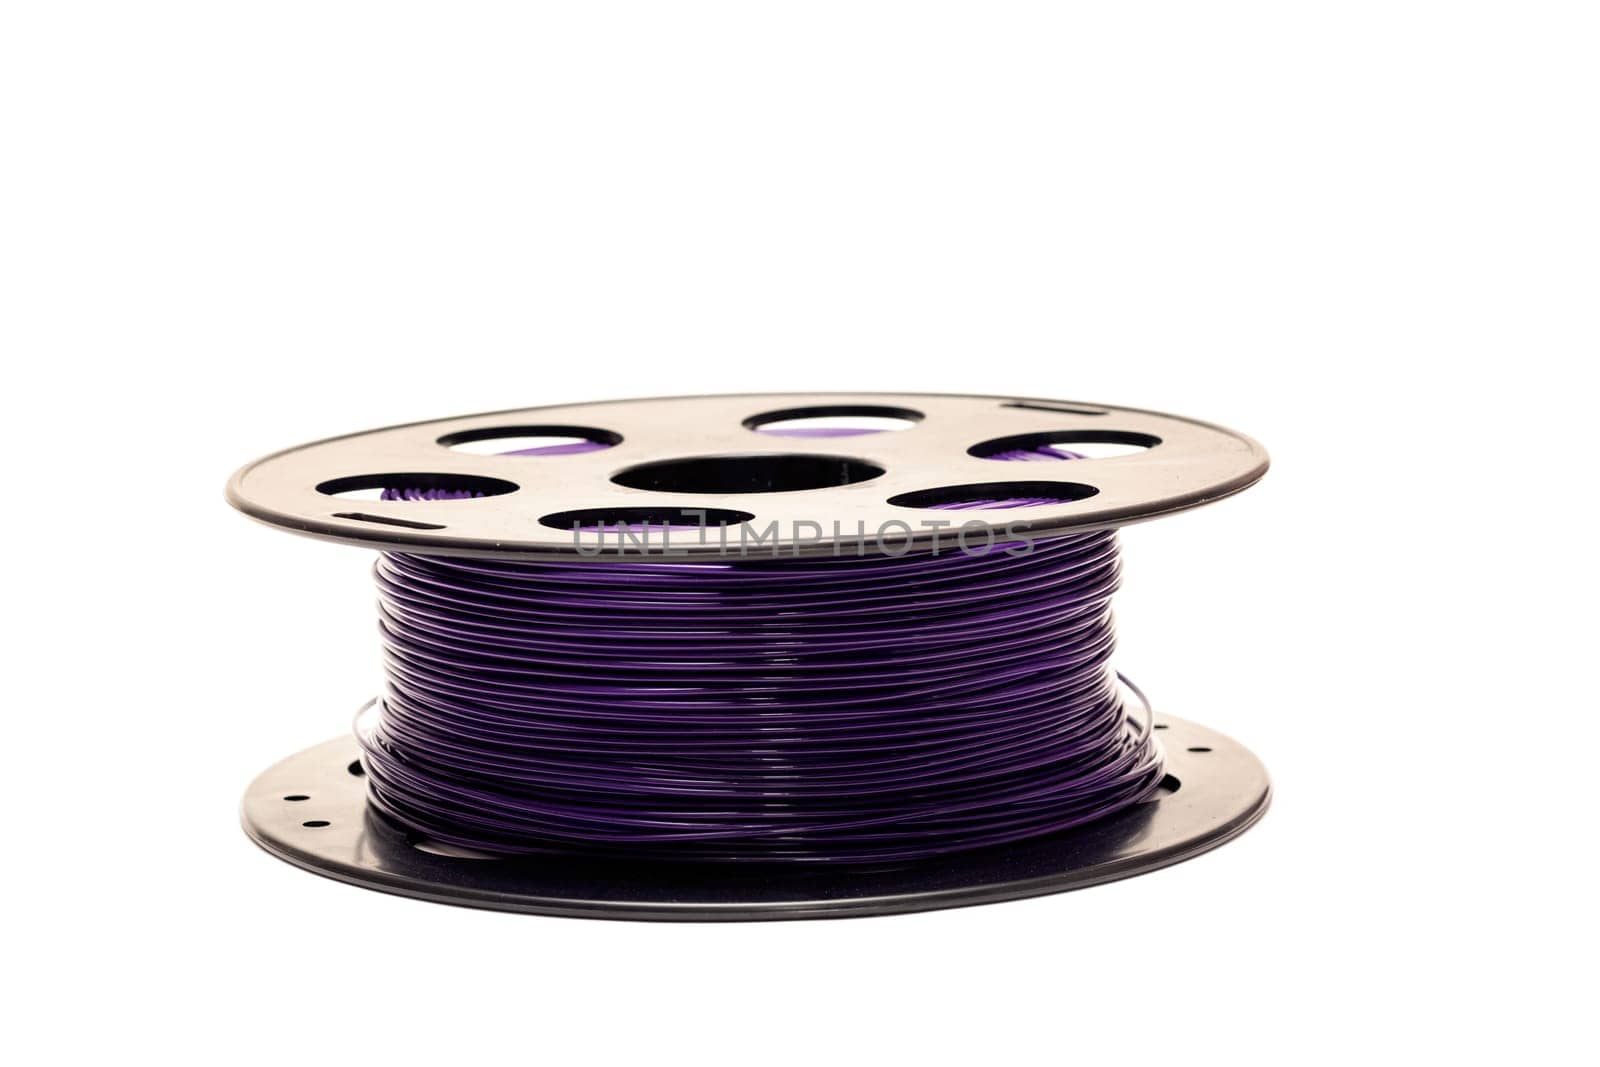 Coil with purple wires, isolated on a white background by Vera1703